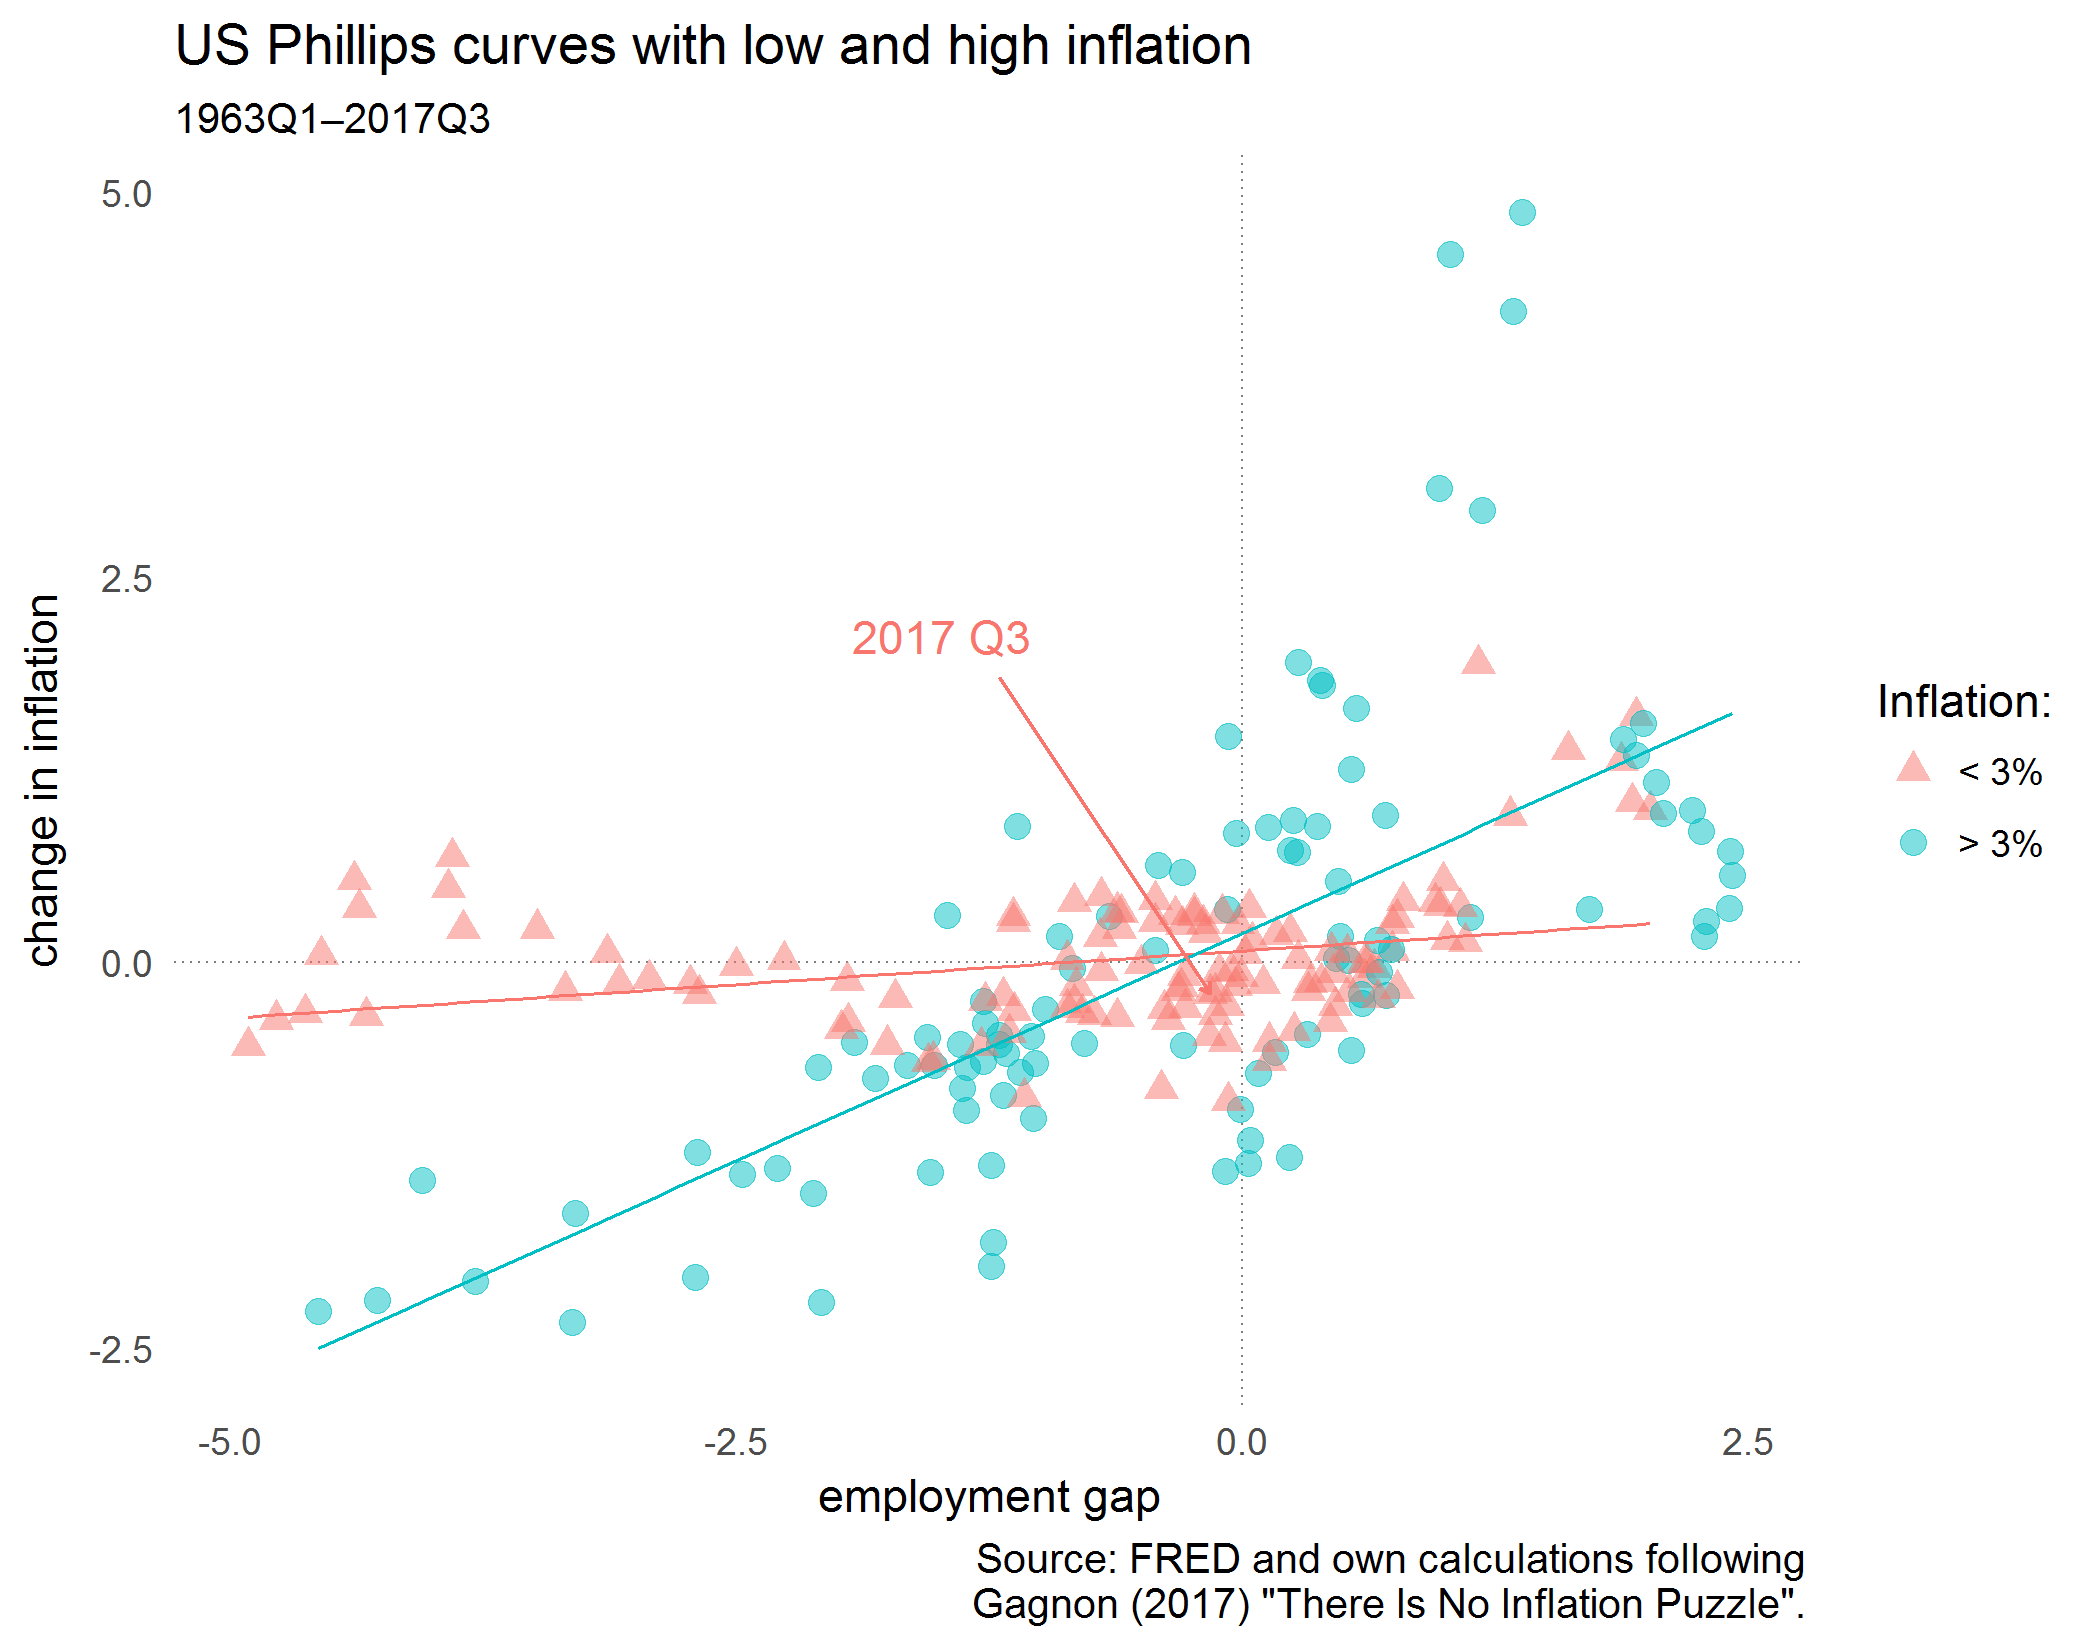 US Phillips curves with low and high inflation 1963-2017